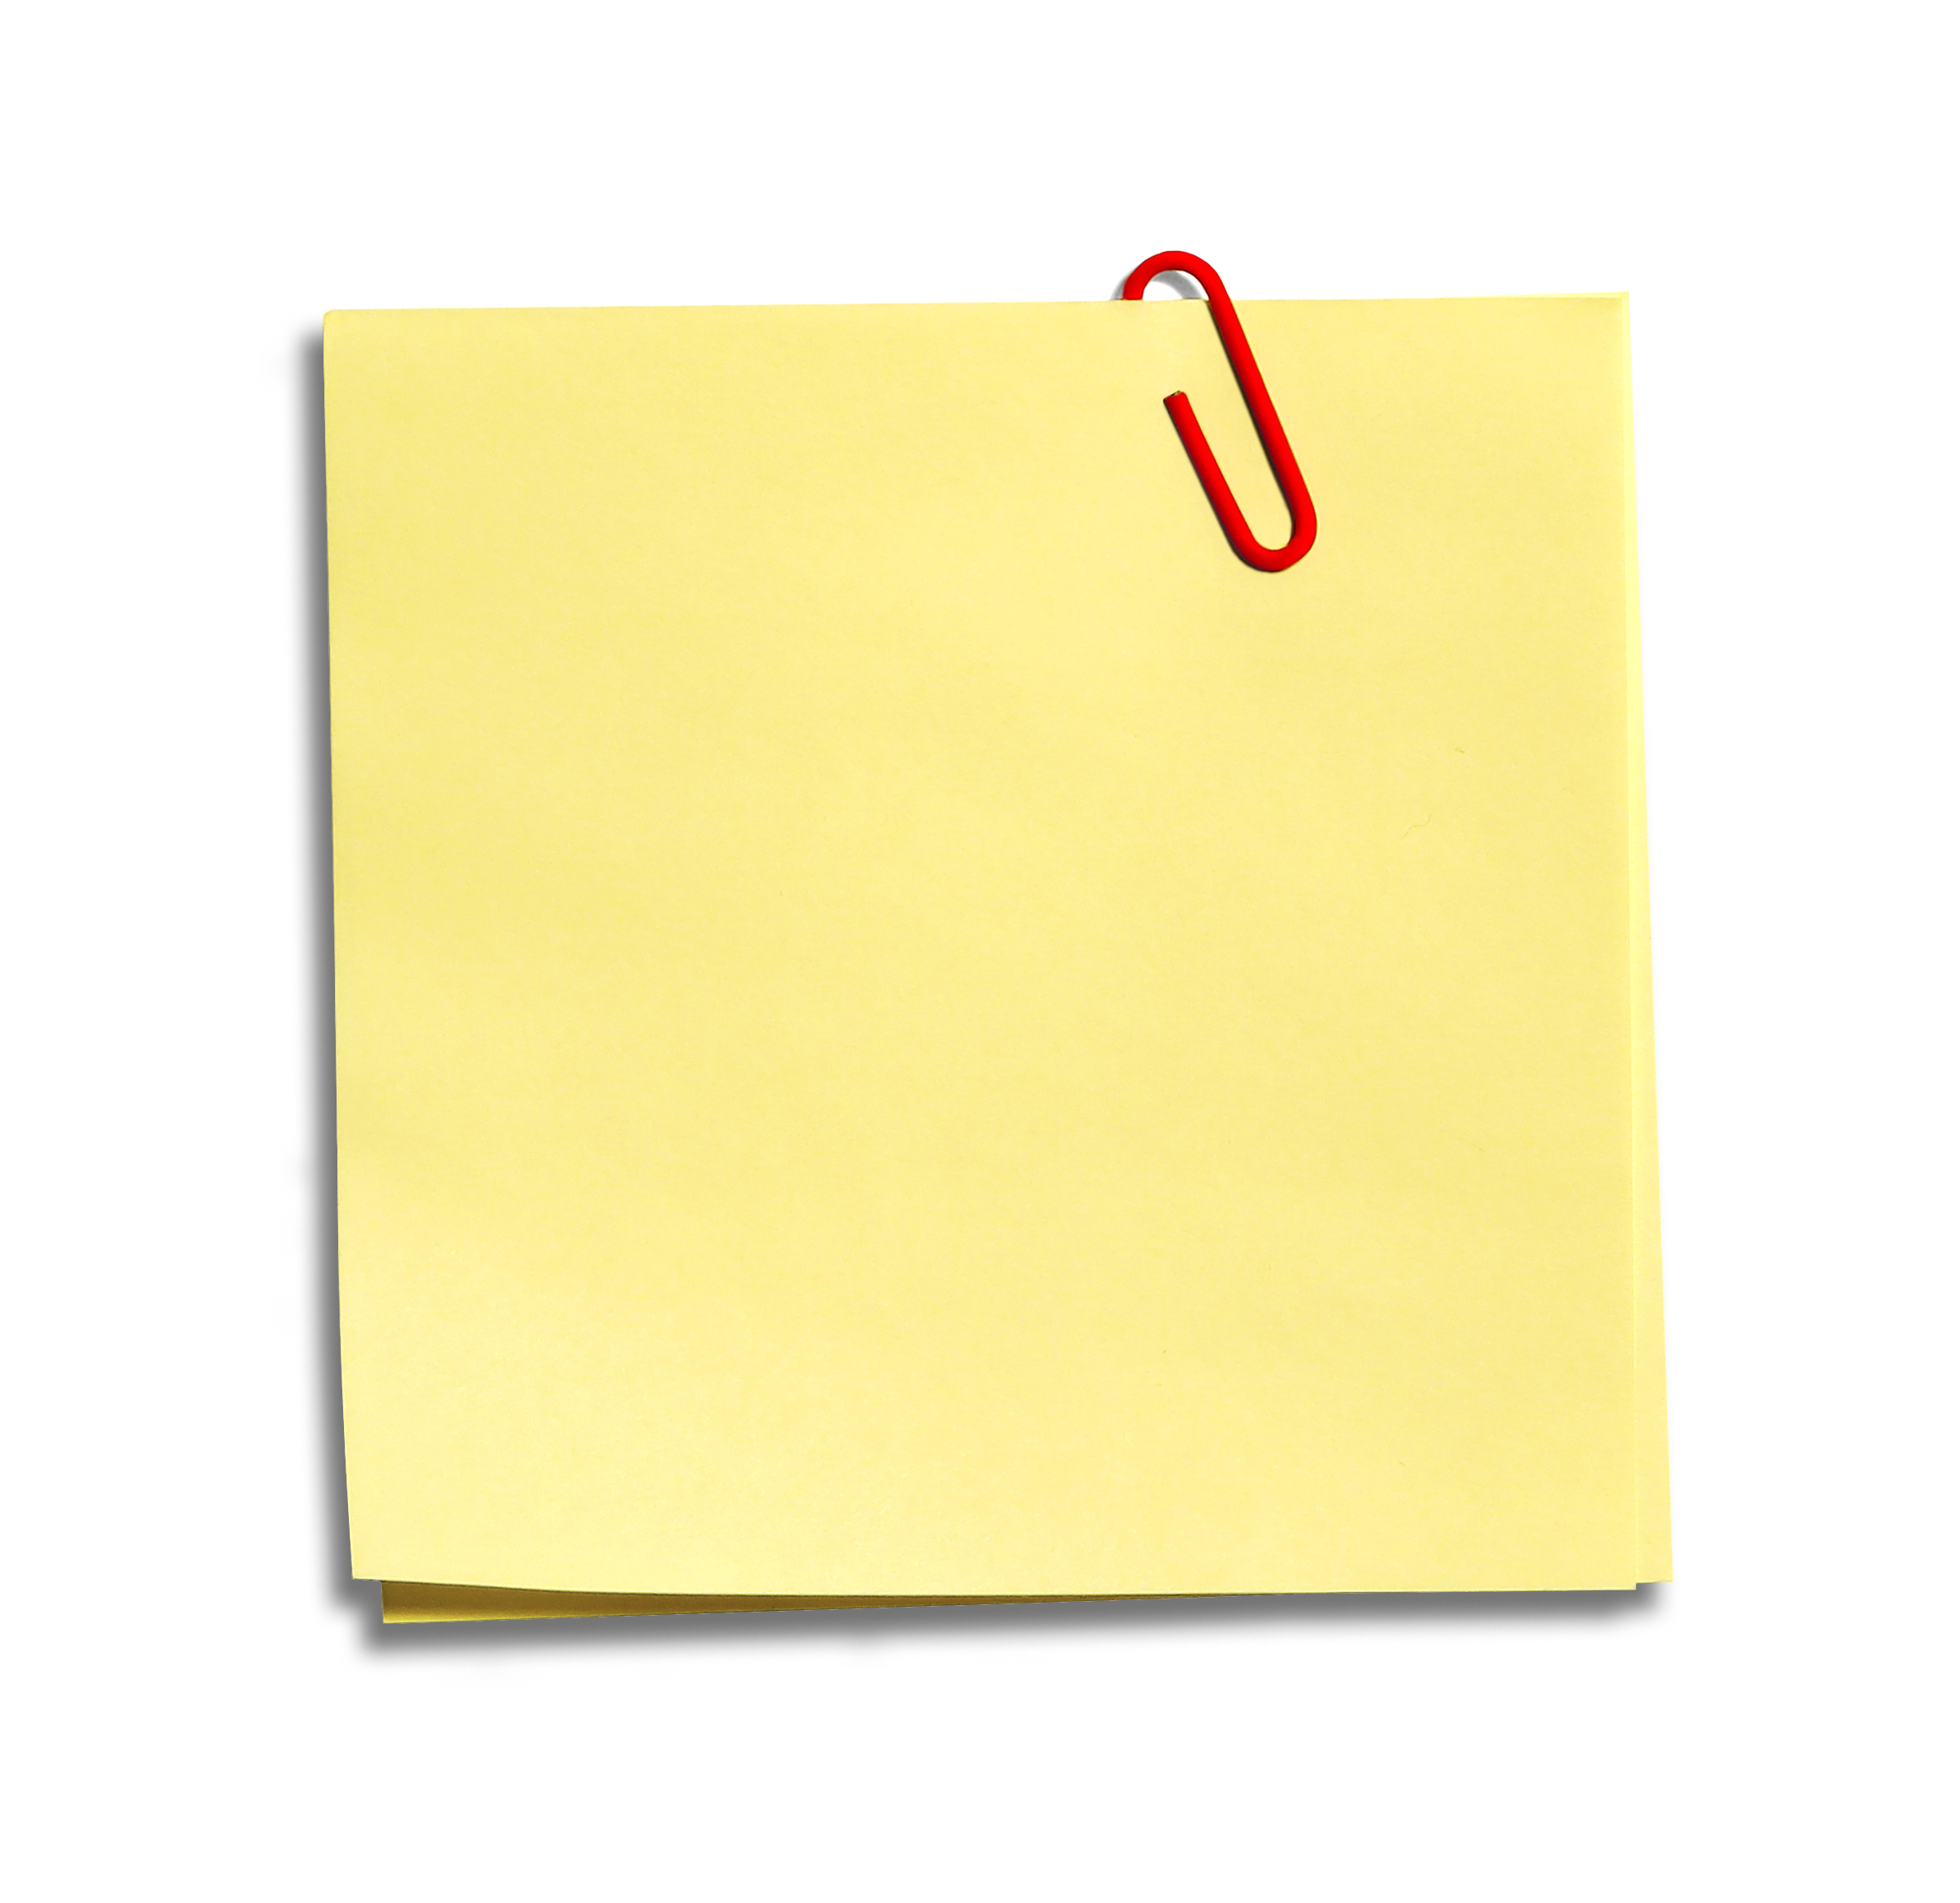 free post it notes for desktop